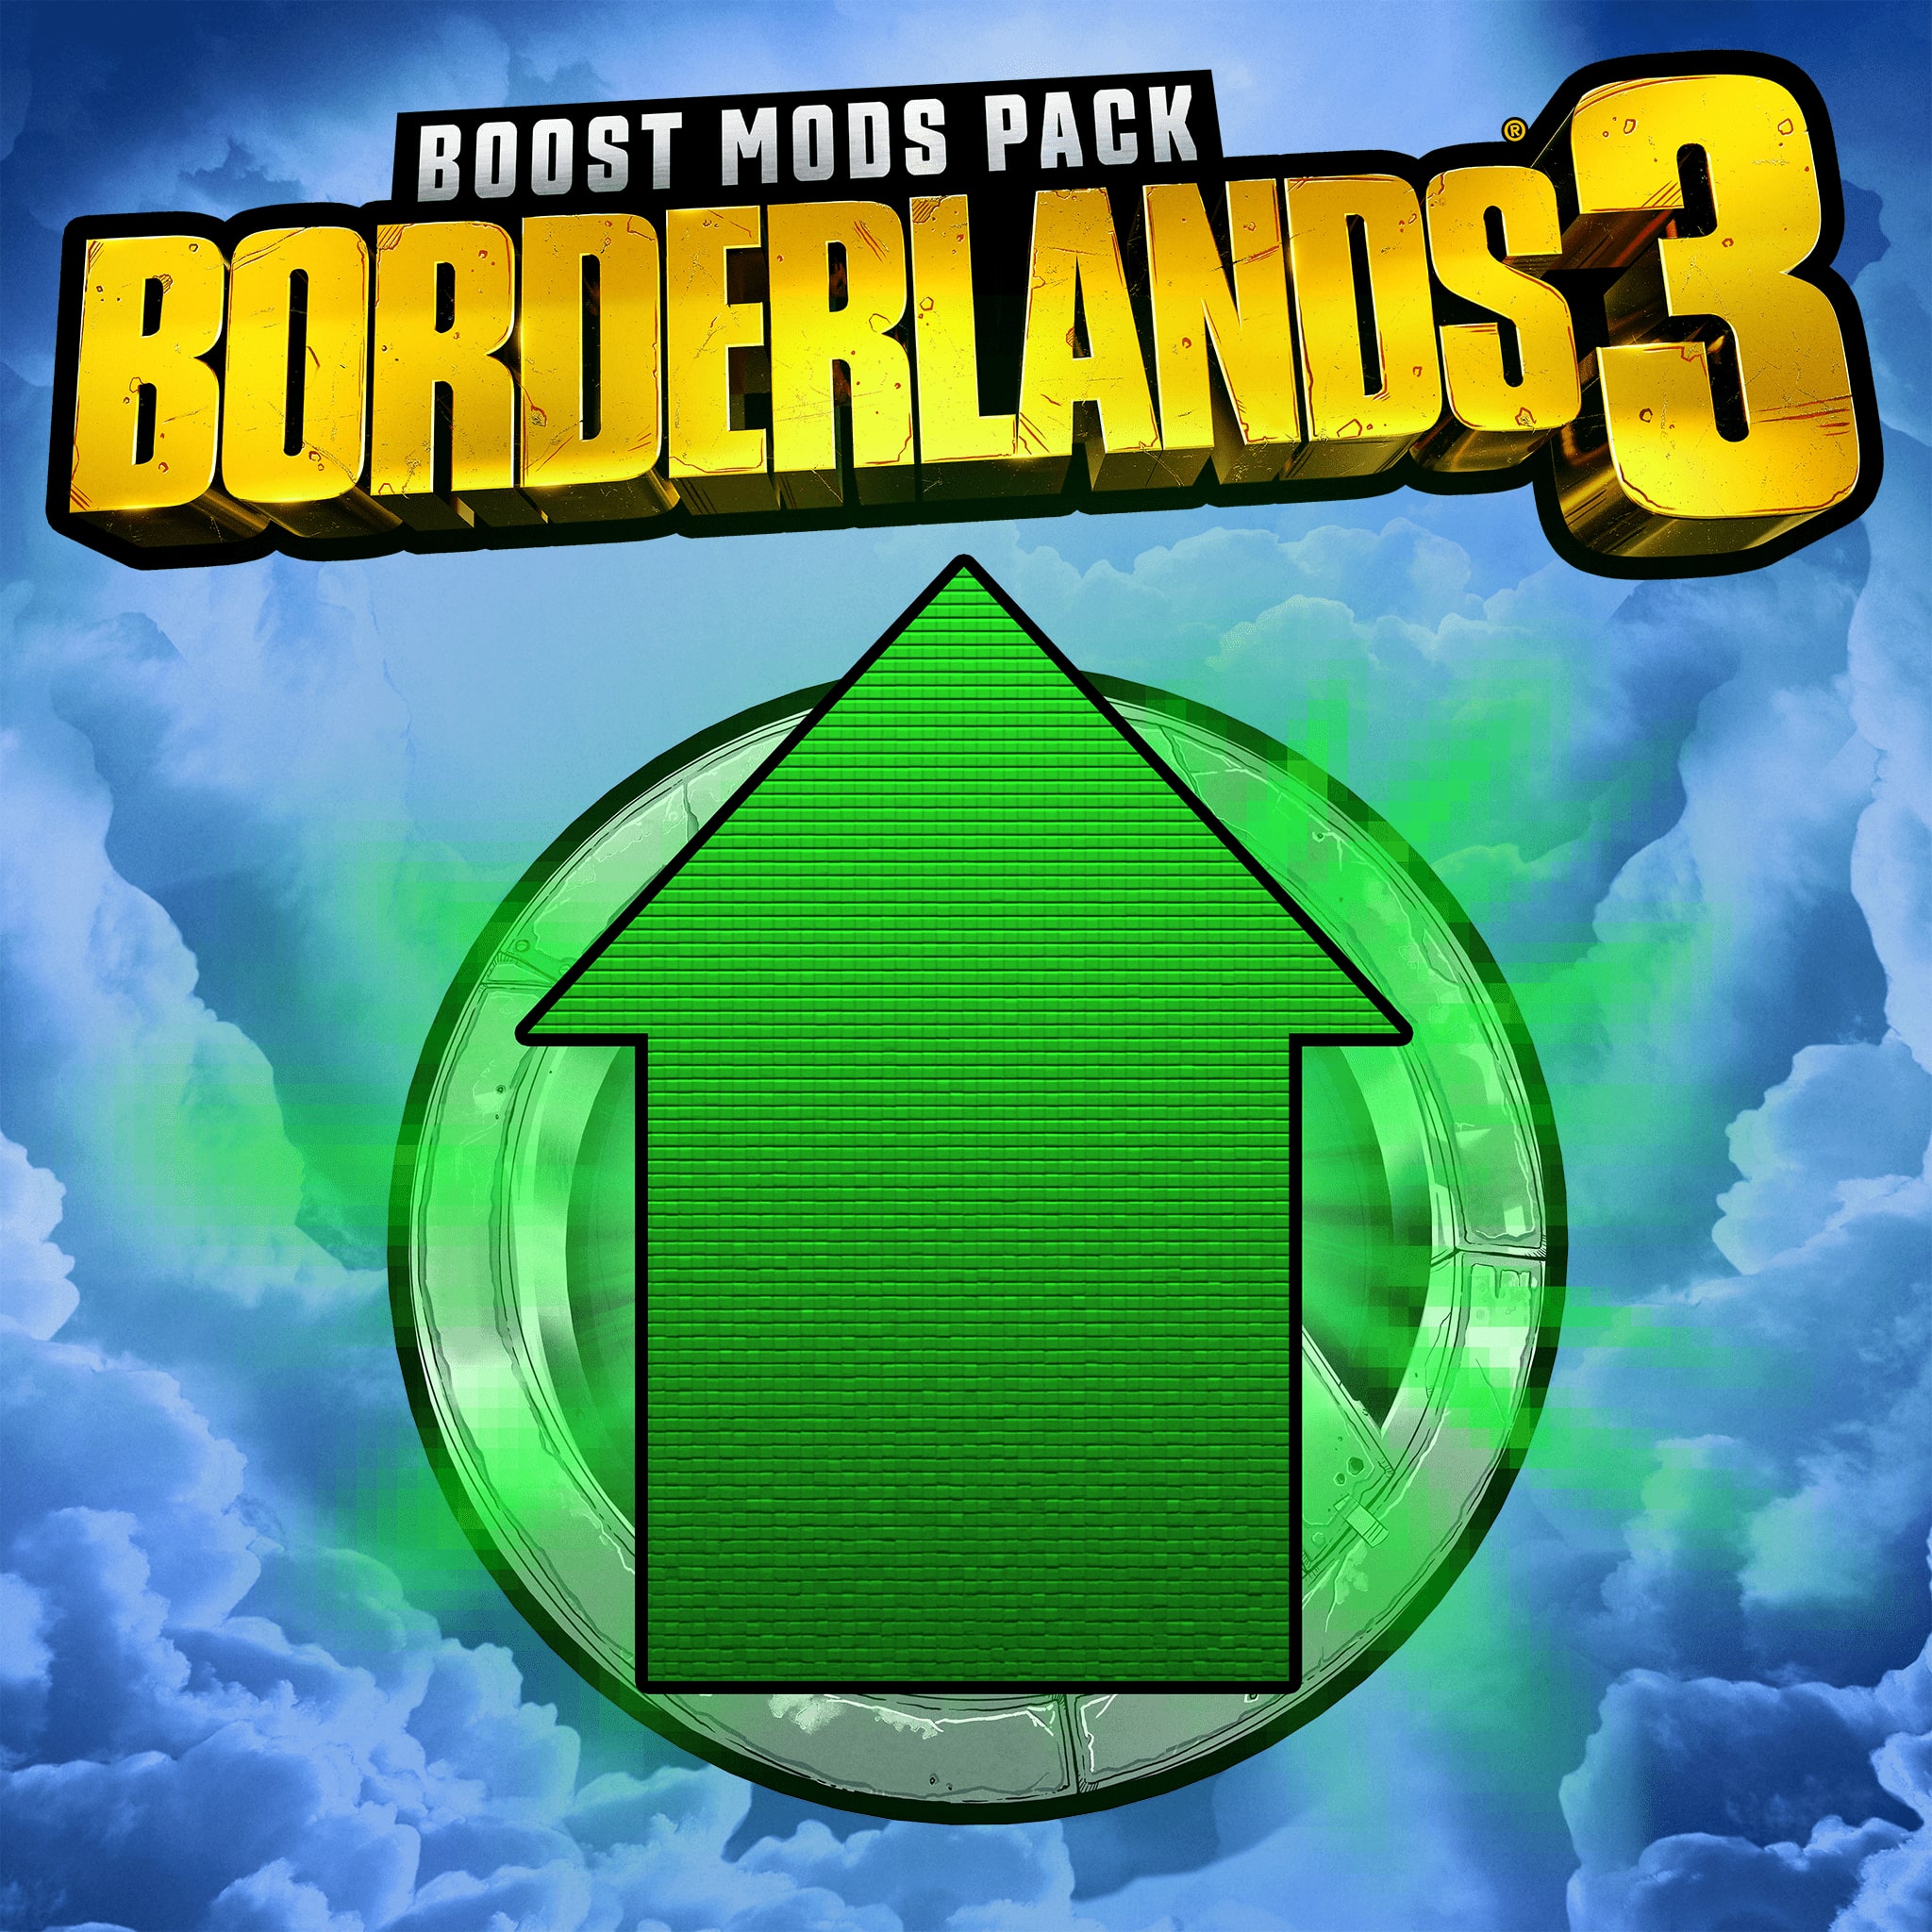 Borderlands 3 Boost Mods Pack PS4™ &  PS5™ (English/Chinese/Korean/Japanese Ver.)